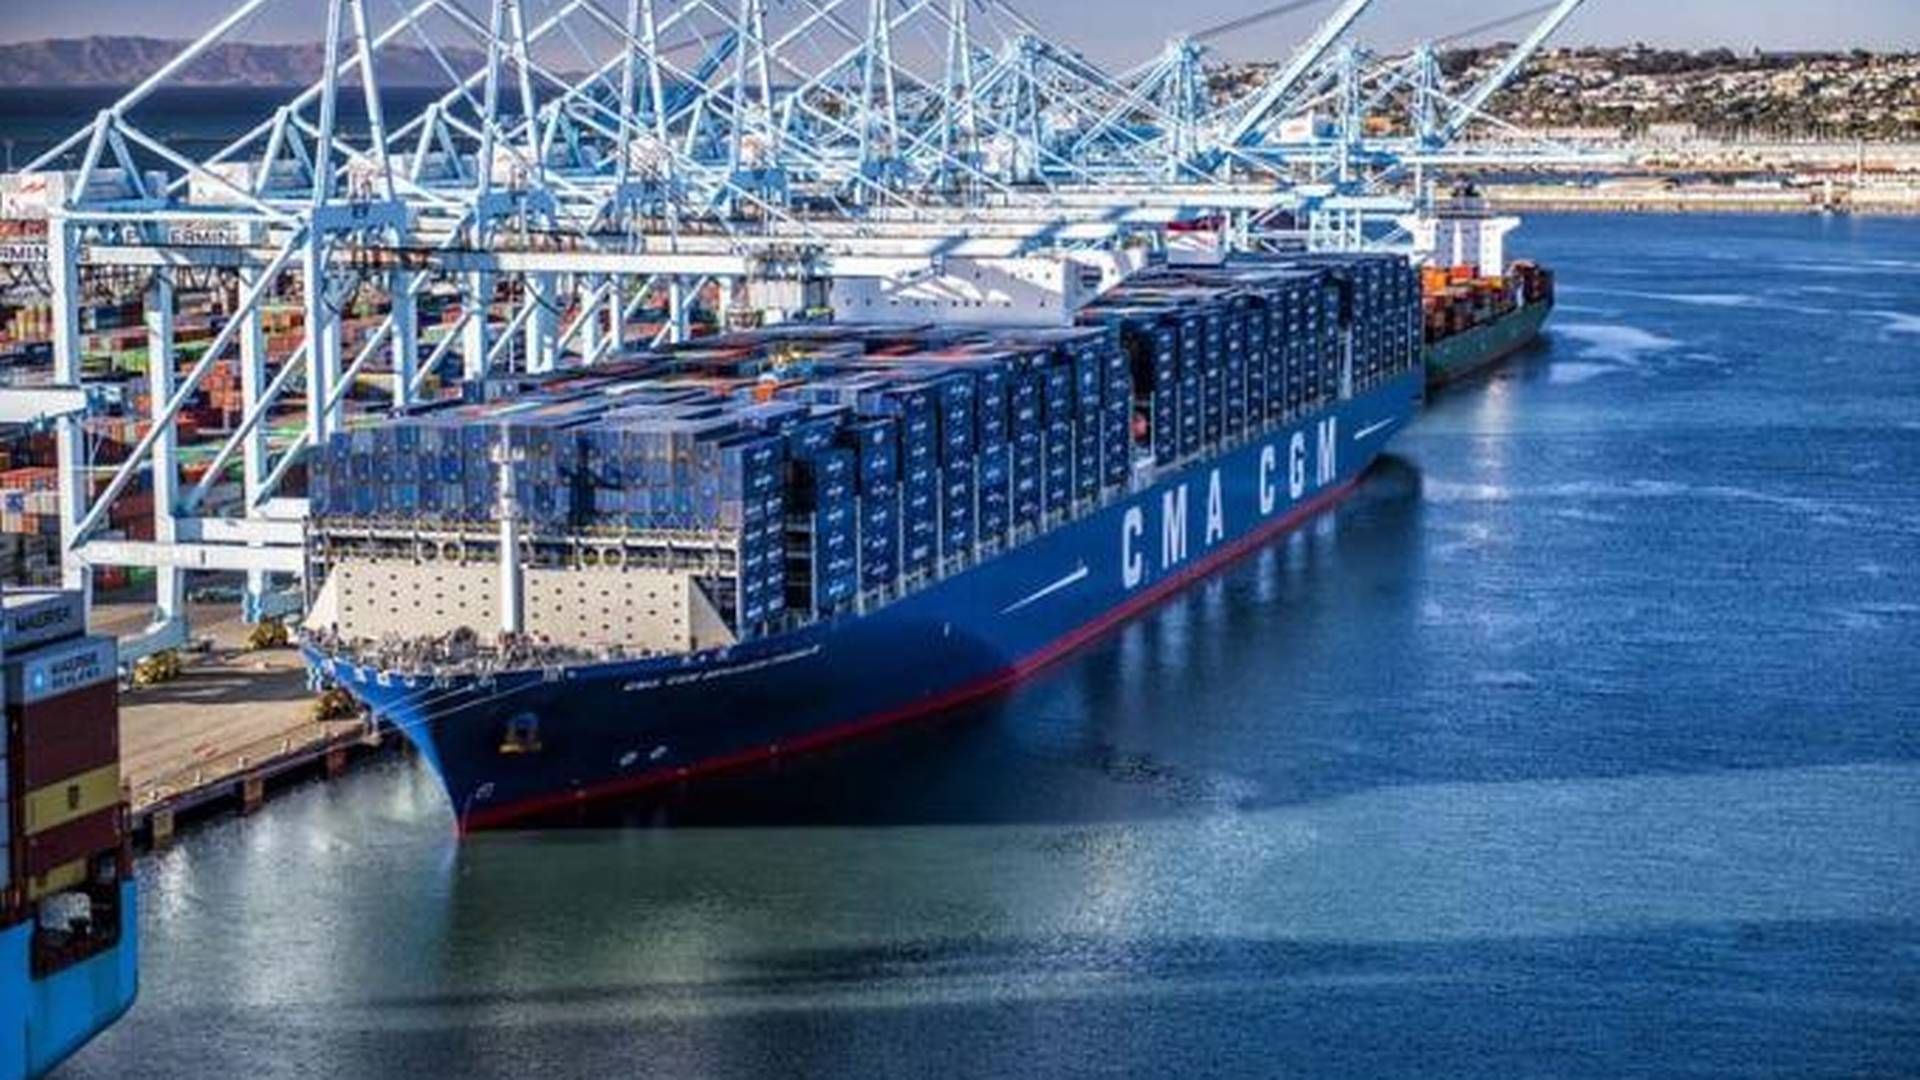 A CMA CGM vessel at the Port of Los Angeles, which together with Long Beach makes up the largest port complex in the US. | Photo: Pr / Cma Cgm